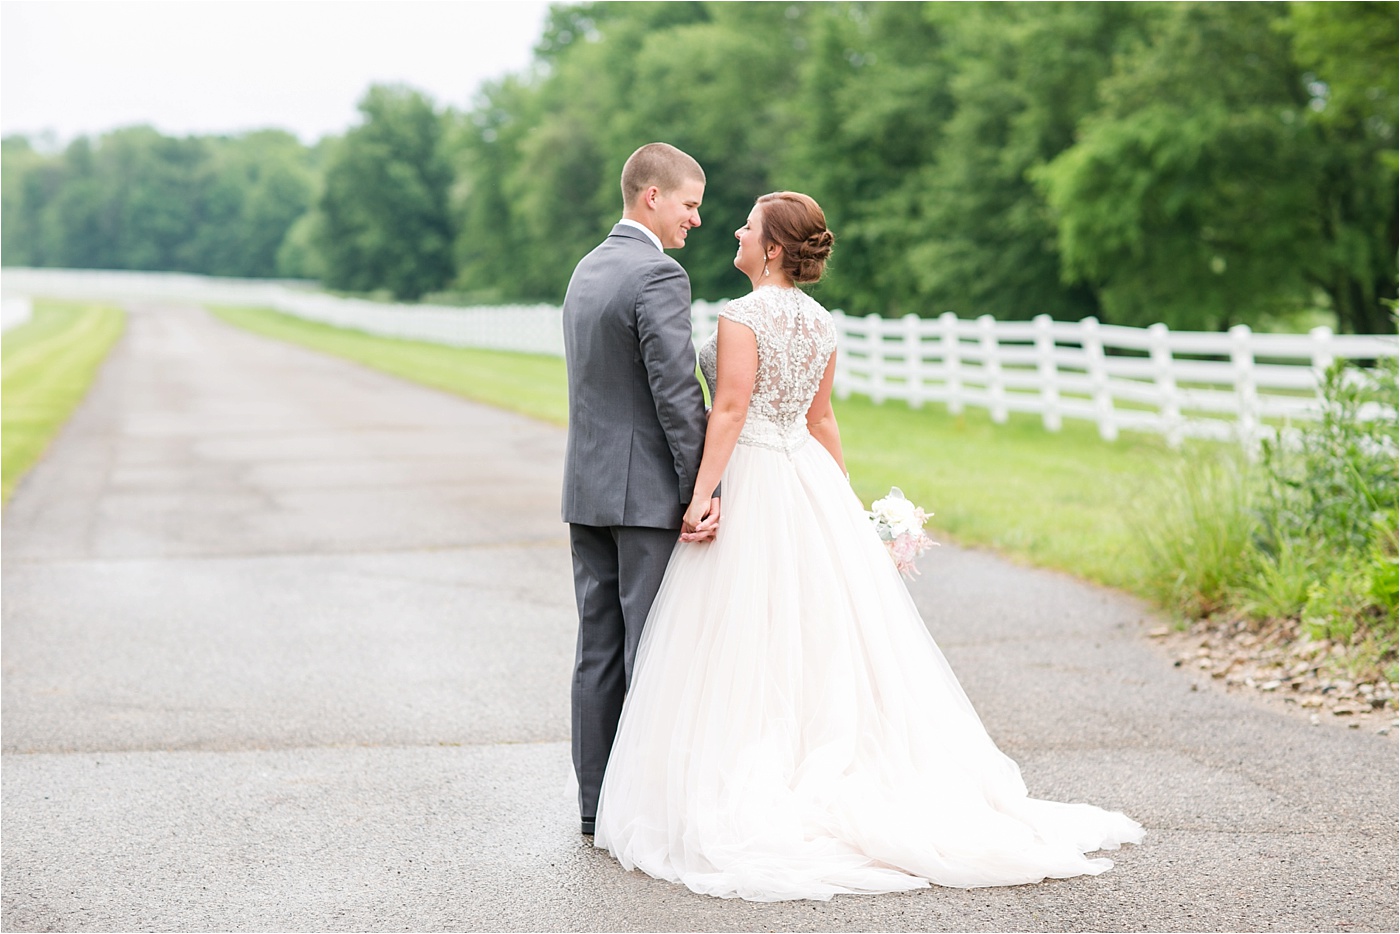 A Blush Outdoor wedding at Irongate Equestrian | KariMe Photography_0122